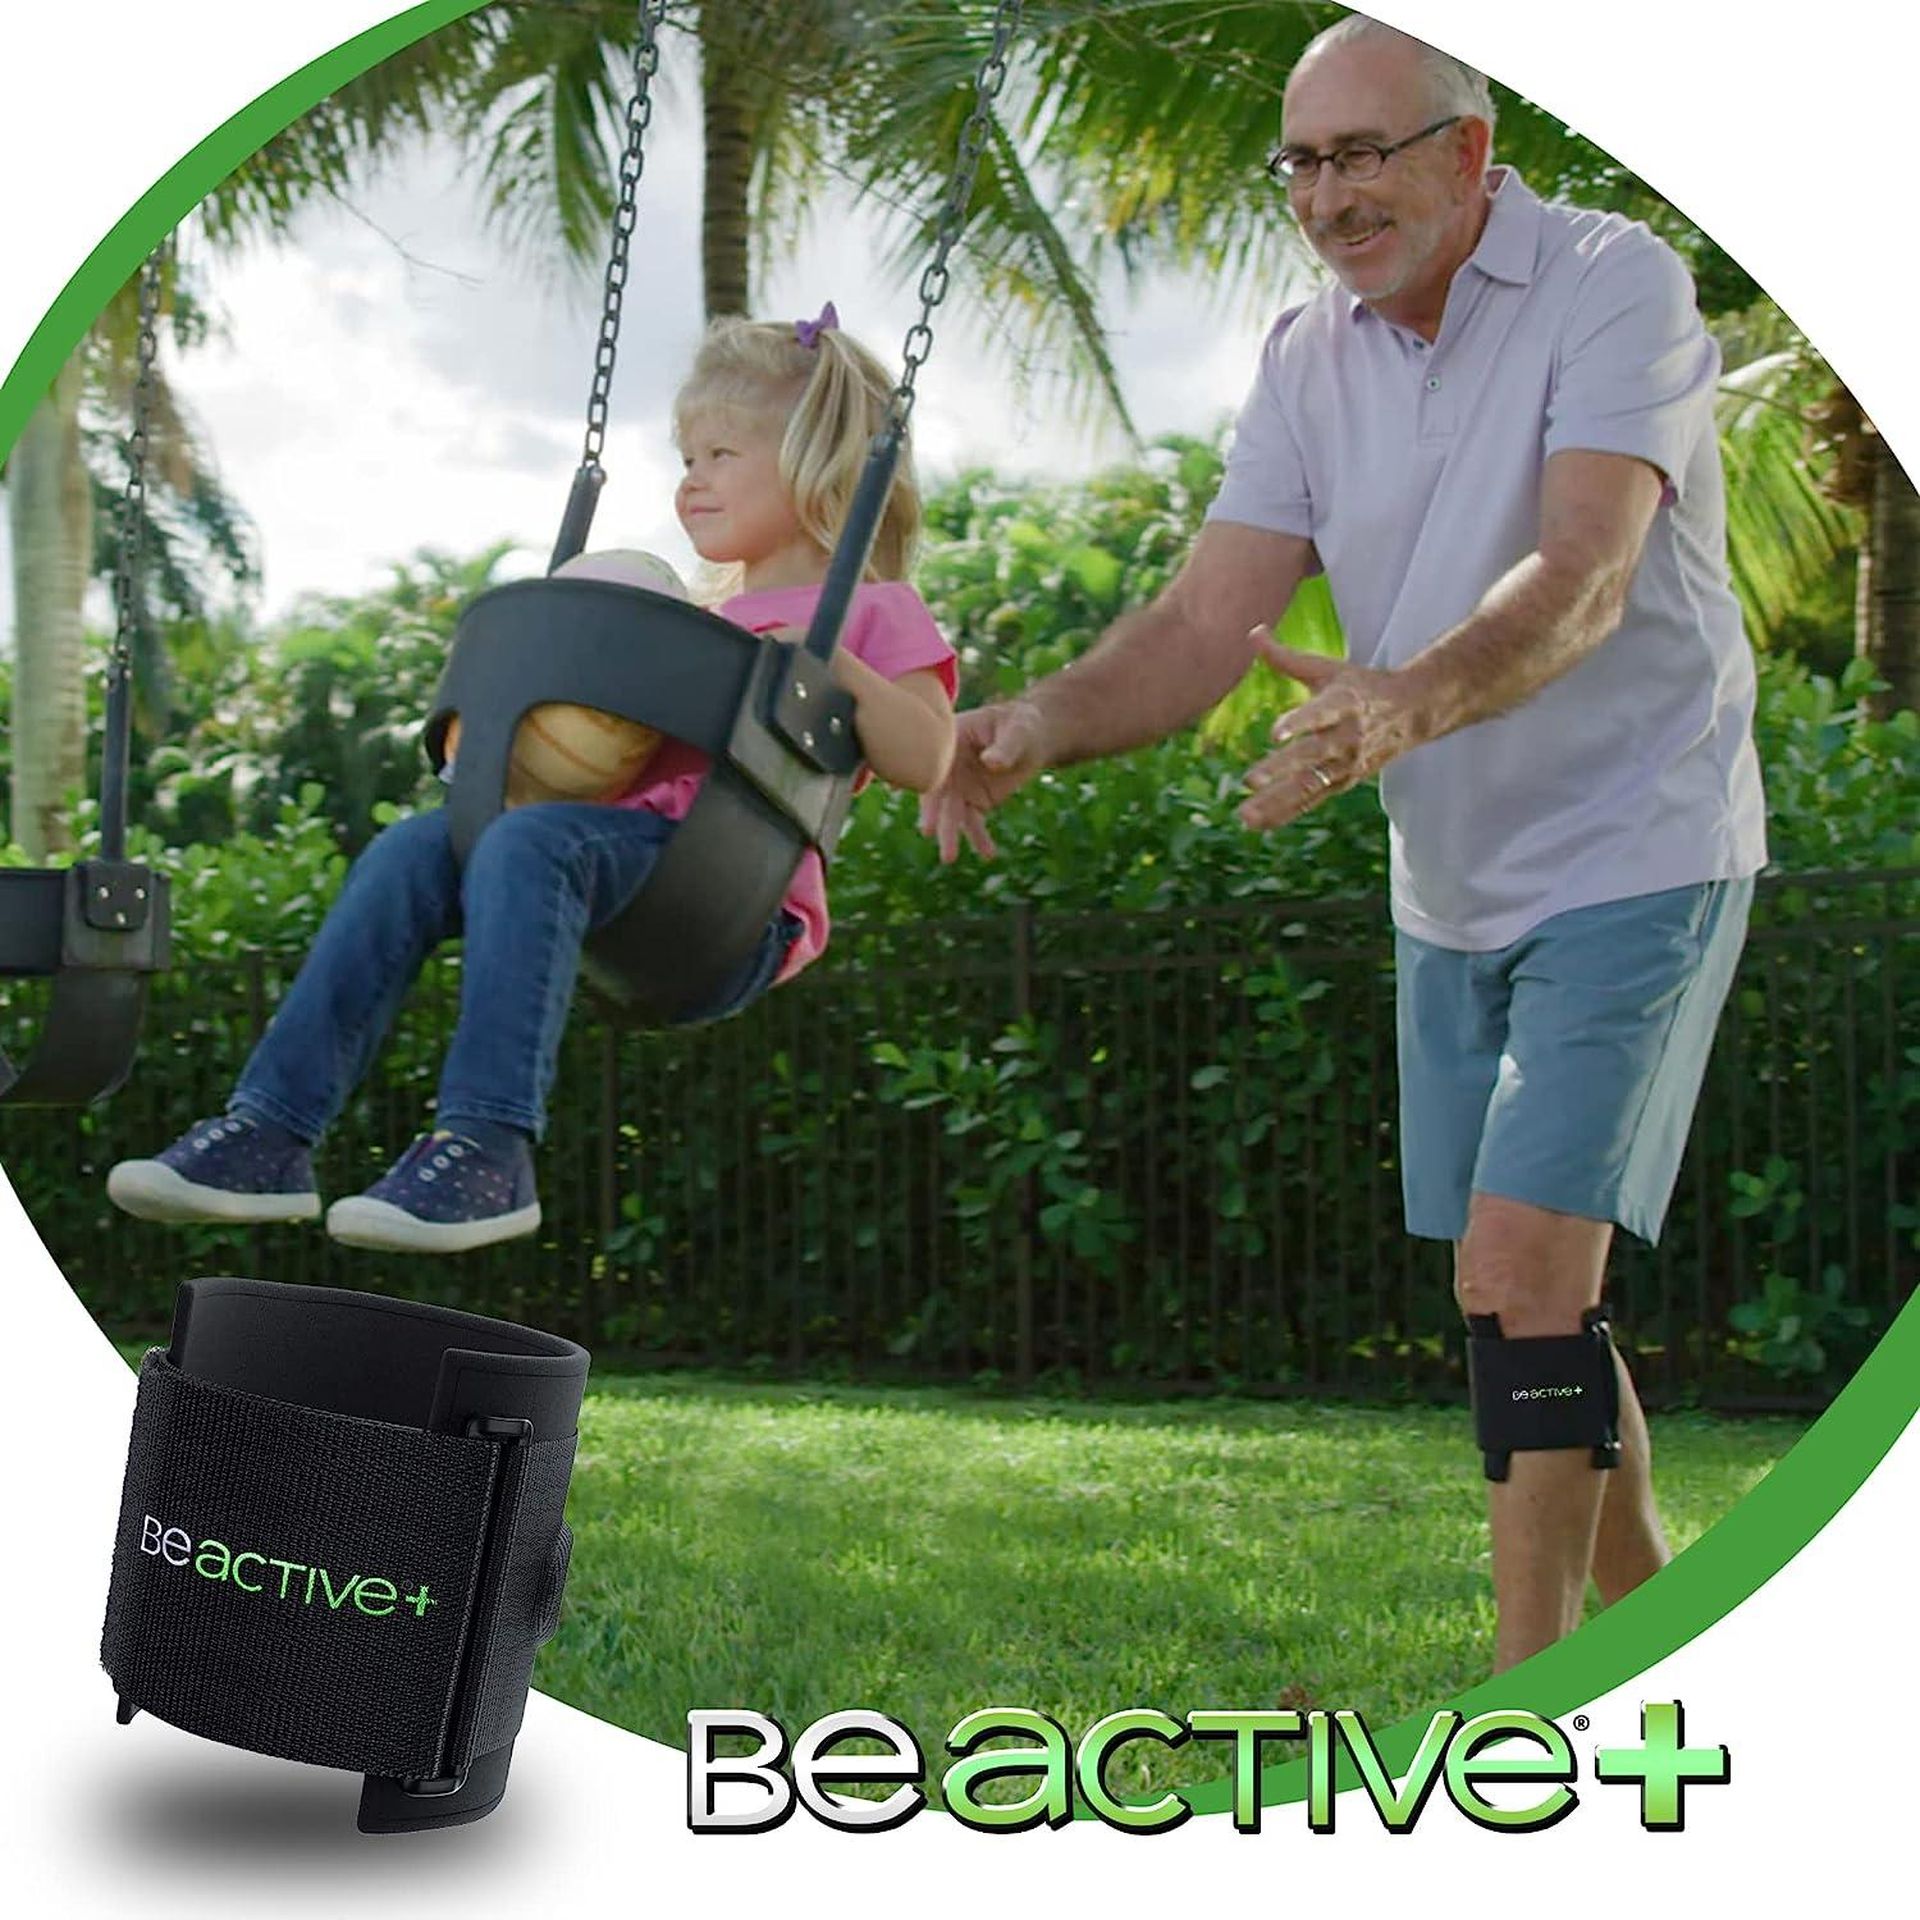 BeActive Plus reviews: Pros and cons